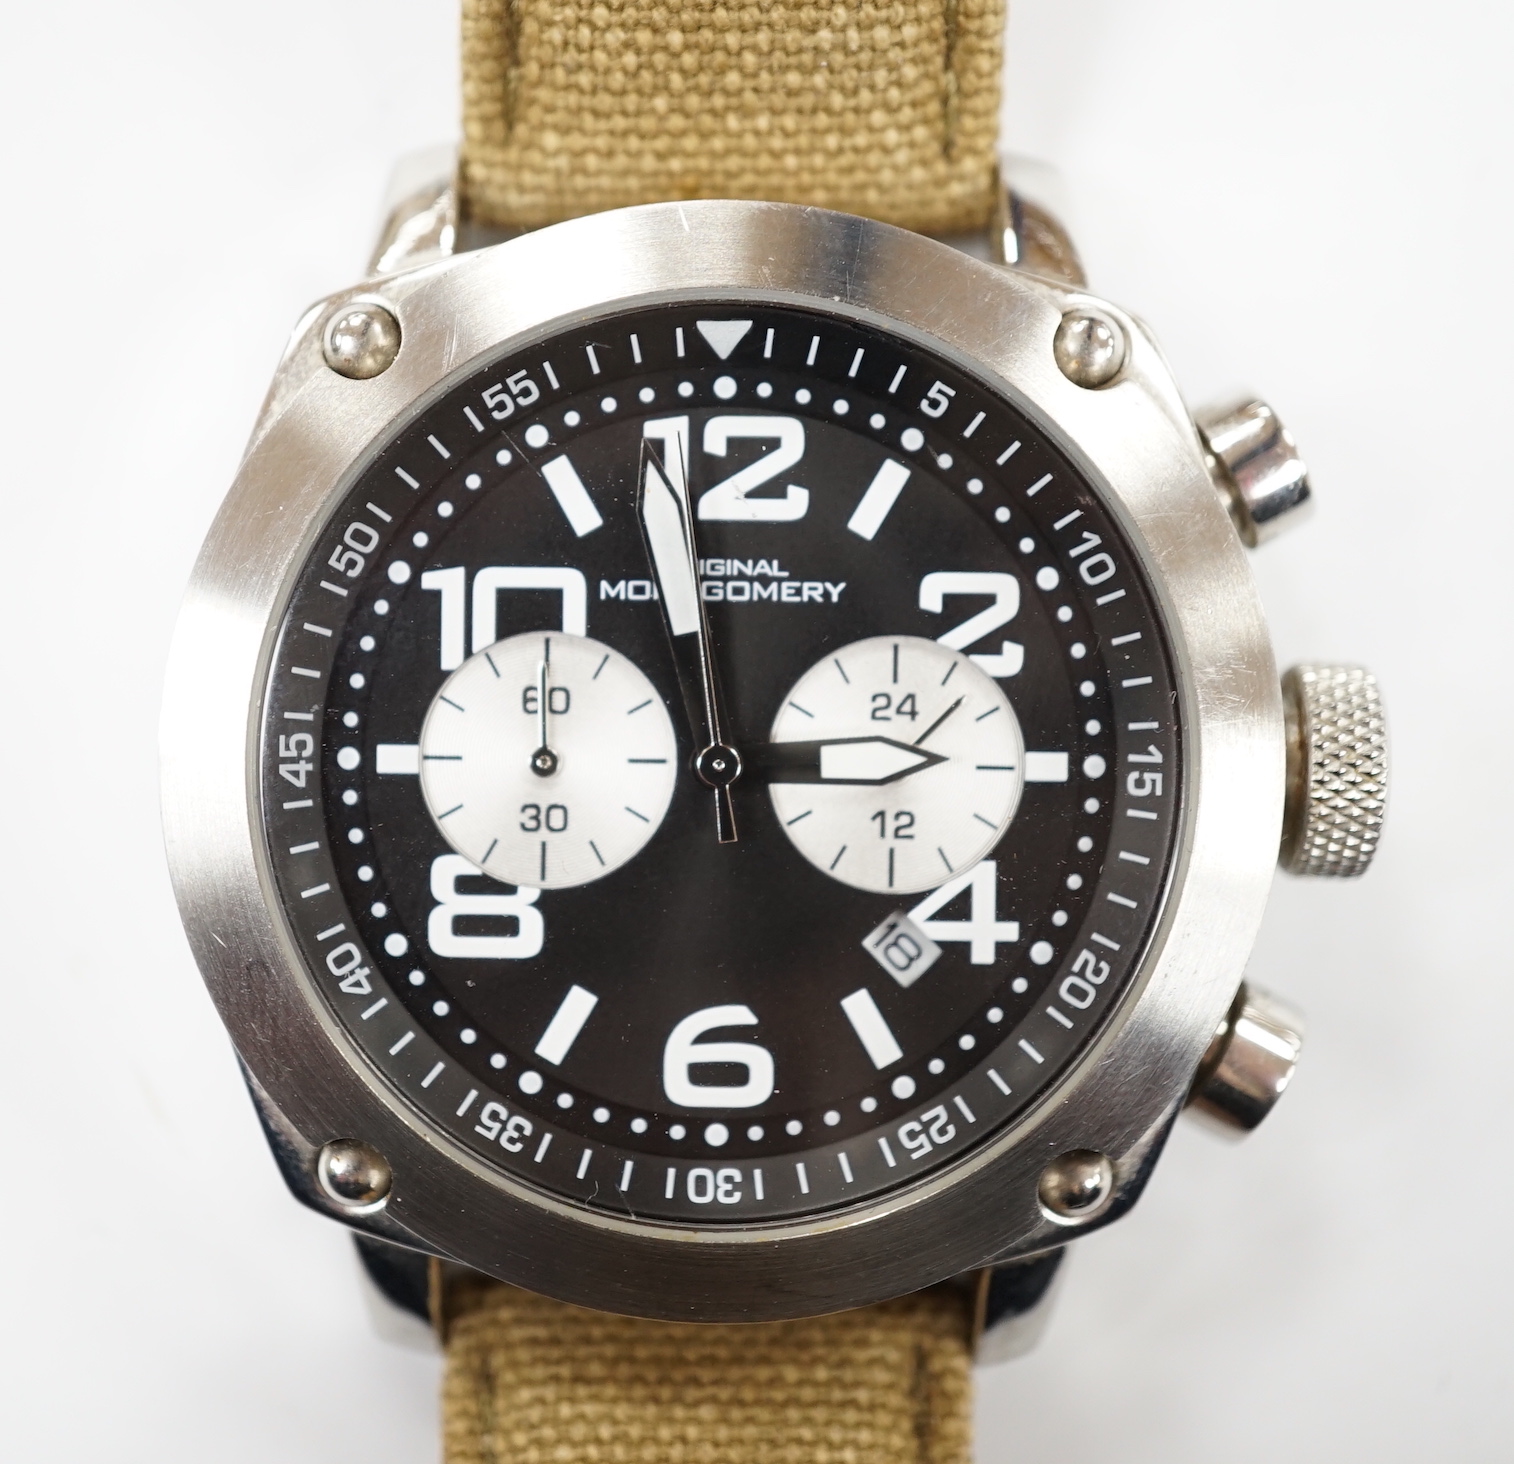 A gentleman's modern stainless steel 'Original Montgomery' chronograph quartz wrist watch, on a fabric and leather strap, design based on a model used by the British Army during WWII.